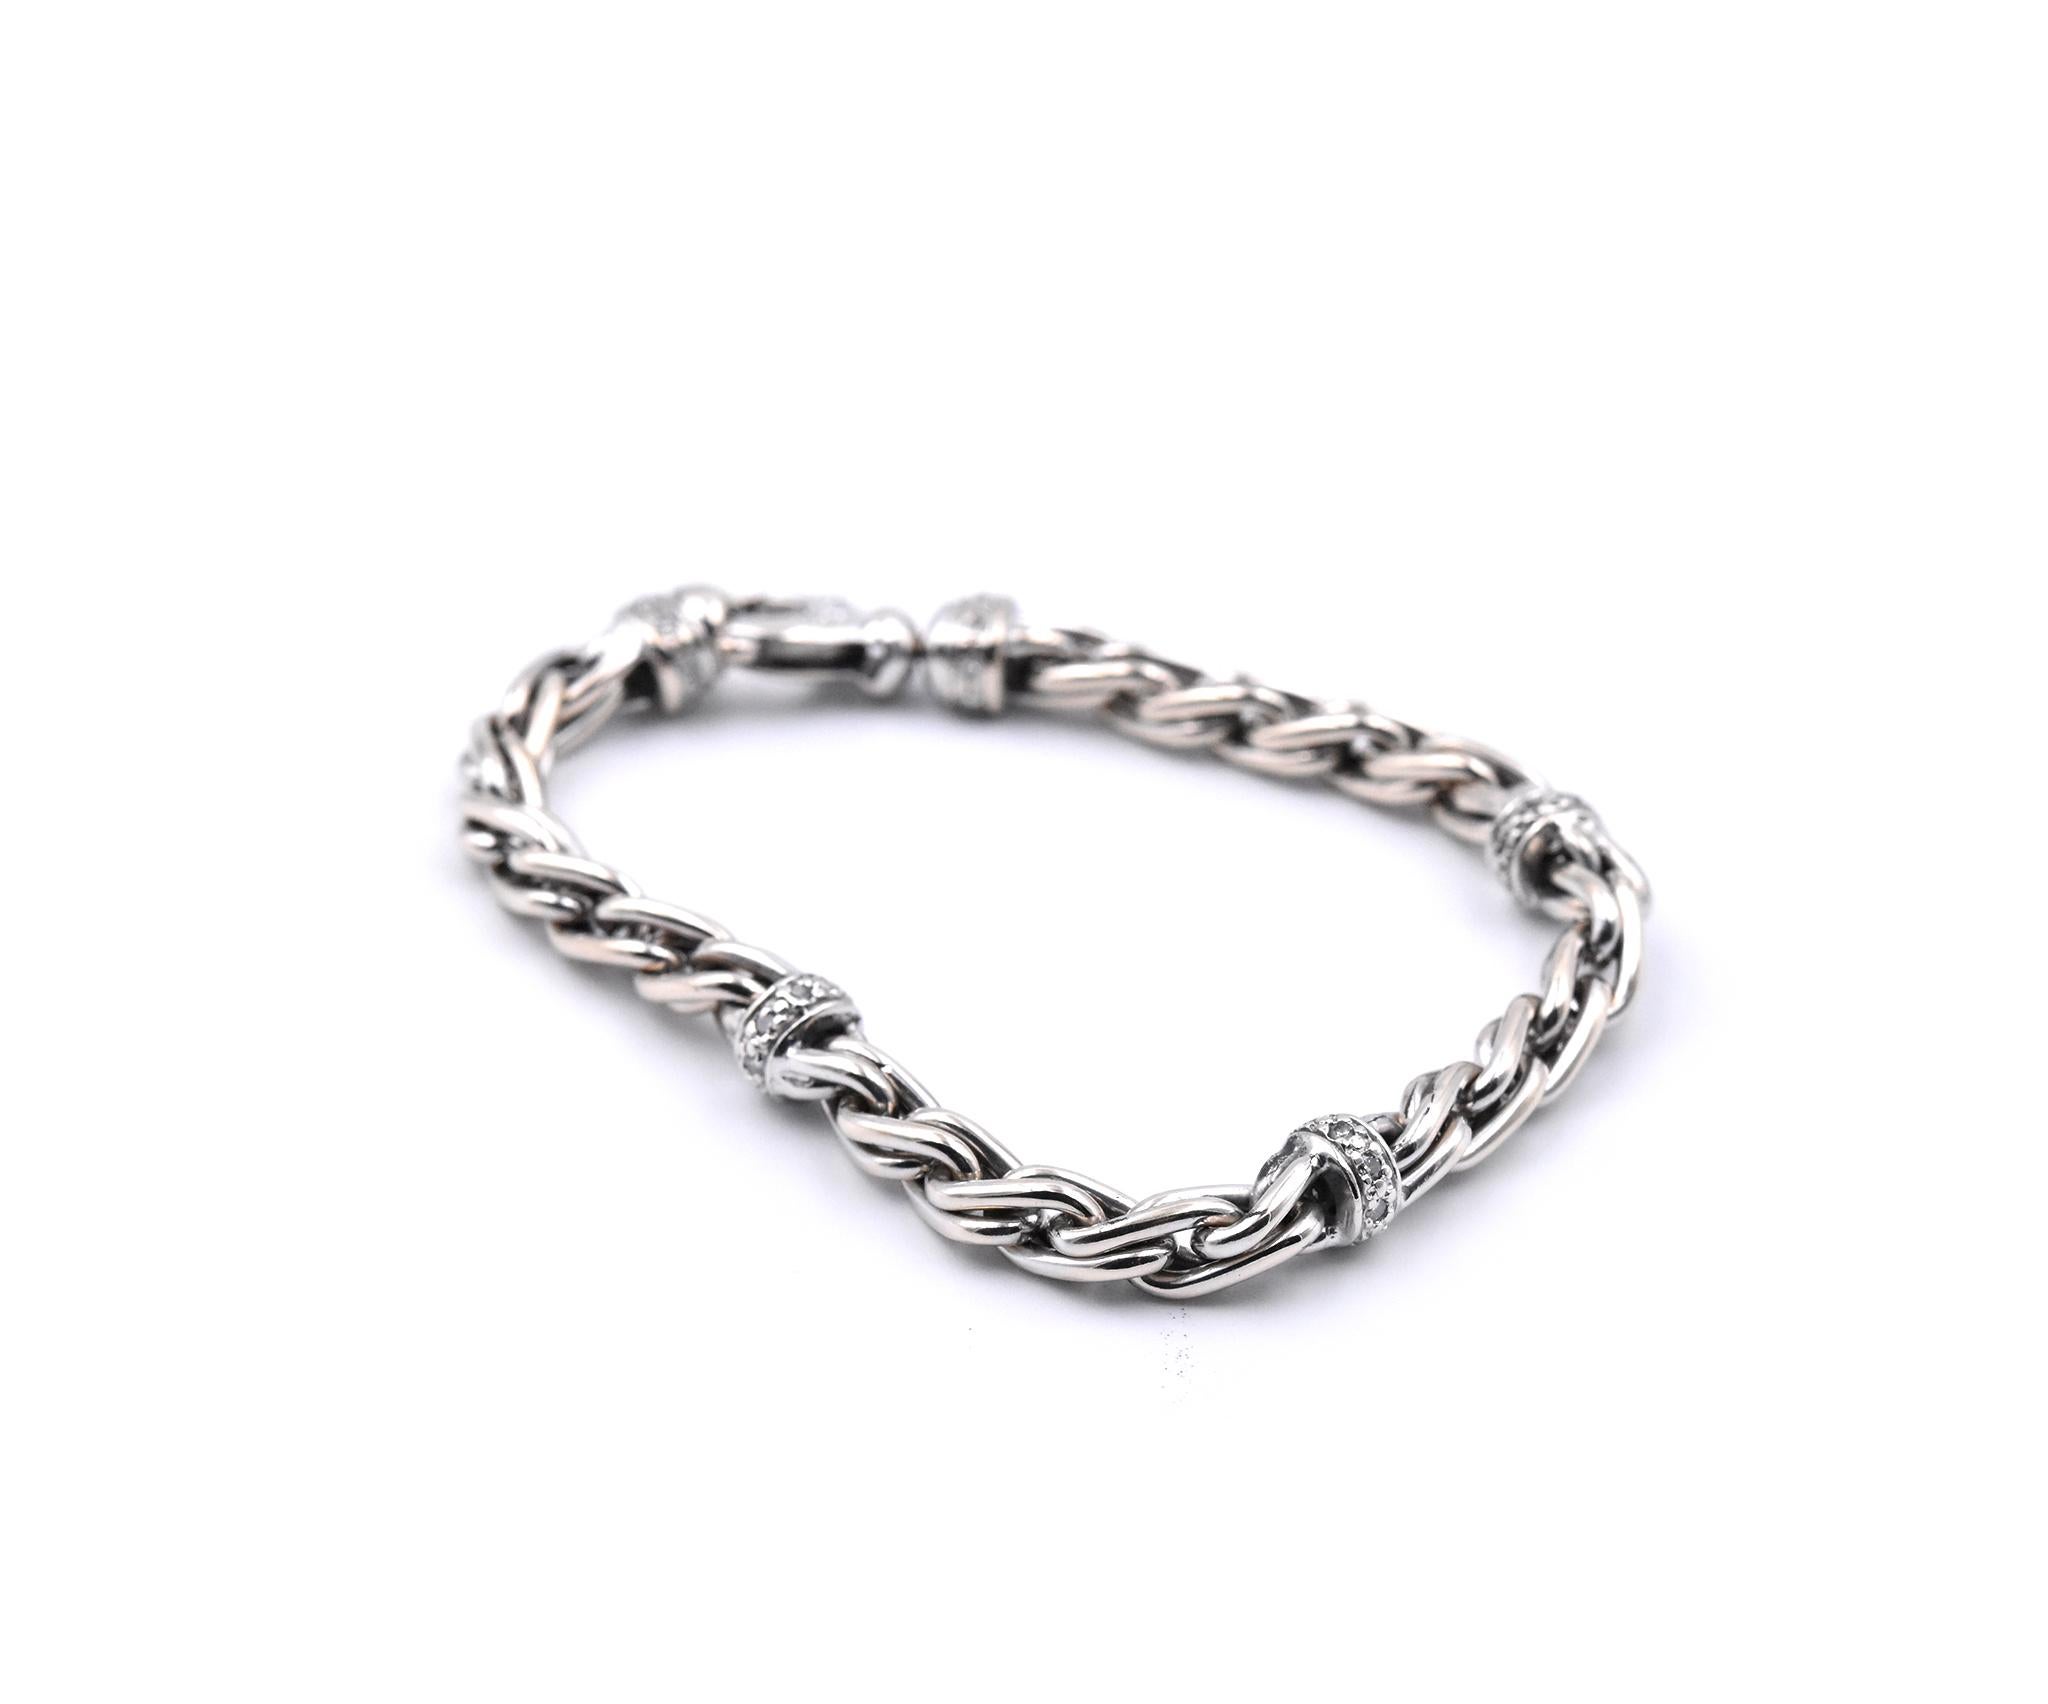 Designer: custom 
Material: 18k white gold
Diamonds: 46 round brilliant cuts 
Dimensions: bracelet will fit a size 7-inch wrist, bracelet measures 7.00mm wide
Weight: 34.72 grams
